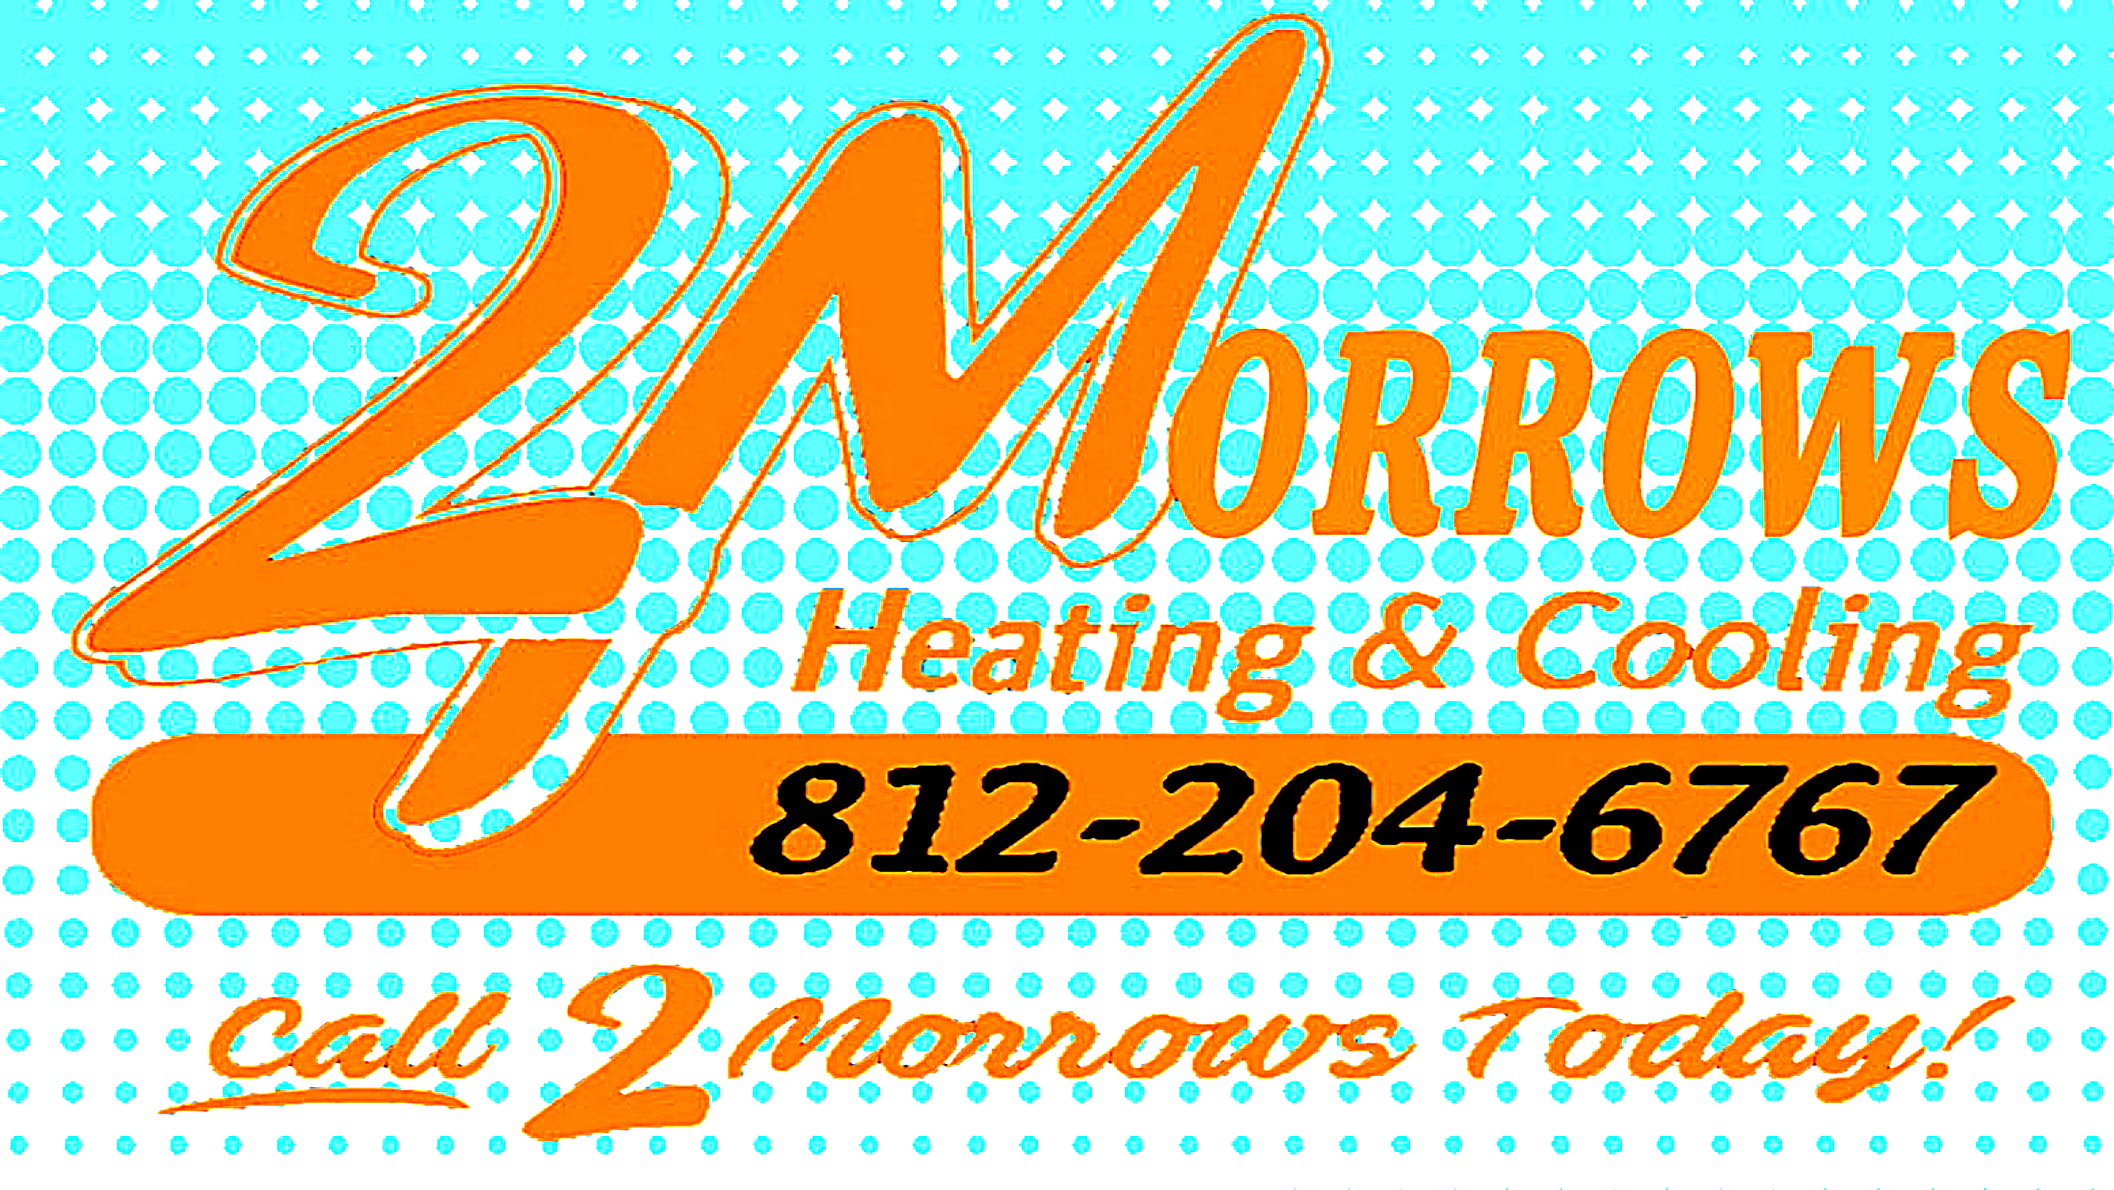 2 Morrows Heating and Cooling Logo